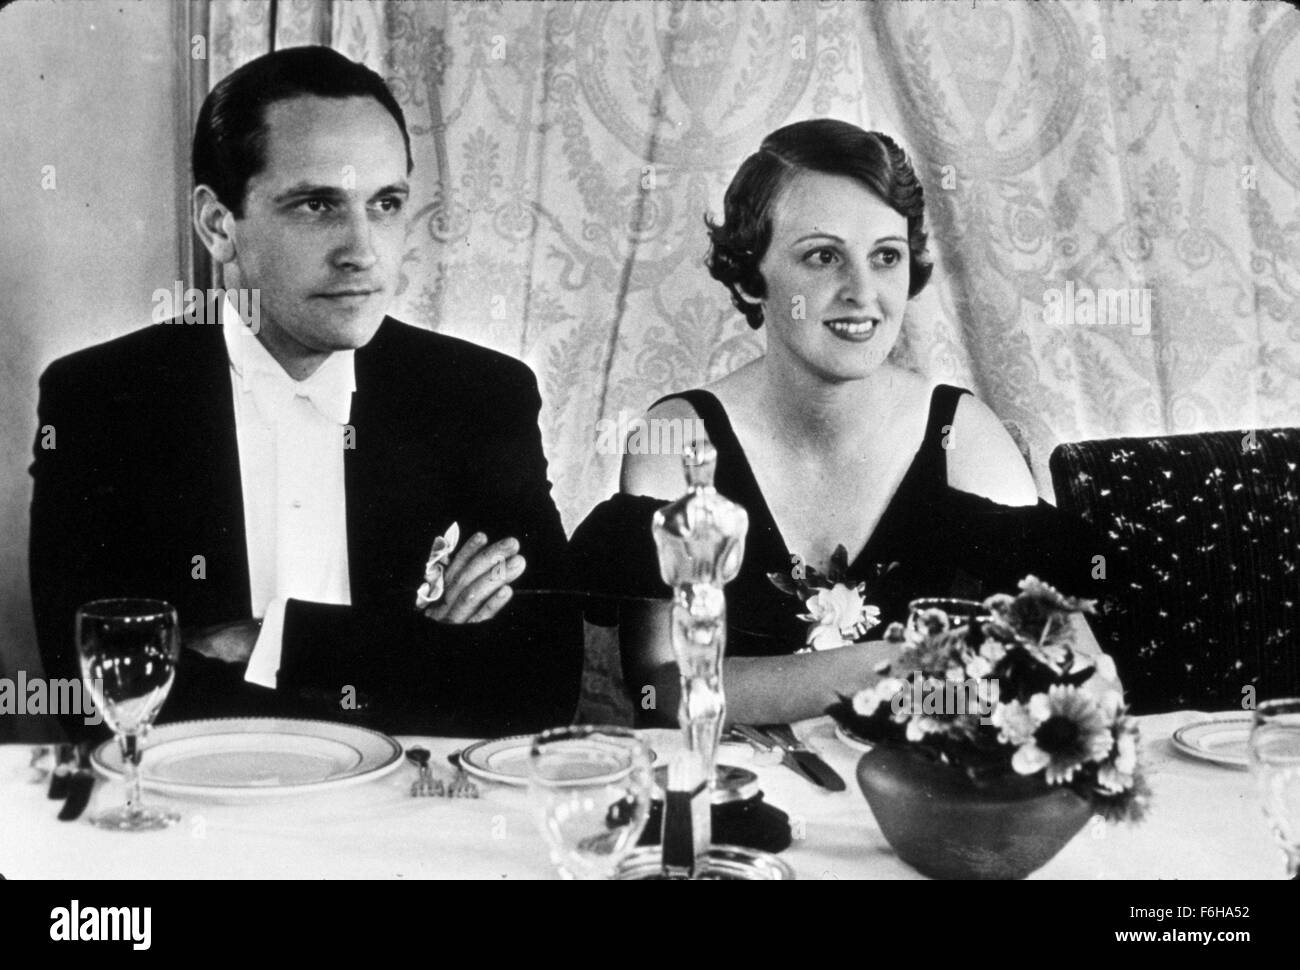 1932, Film Title: DR. JEKYLL AND MR. HYDE, Director: ROUBEN MAMOULIAN, Studio: PARAMOUNT, Pictured: 1932, ACADEMY AWARDS CEREMONIES, ACCESSORIES, LOS ANGELES AMBASSADOR HOTEL, AWARDS - ACADEMY, BEST ACTOR, FLORENCE ELDRIDGE, HUSBAND & WIFE, ROUBEN MAMOULIAN, FREDRIC MARCH, MARRIED COUPLES, OSCAR (ACADEMY AWARD STATUE), TUXEDO, SITTING, OSCAR RETRO. (Credit Image: SNAP) (Credit Image: c SNAP/Entertainment Pictures) Stock Photo